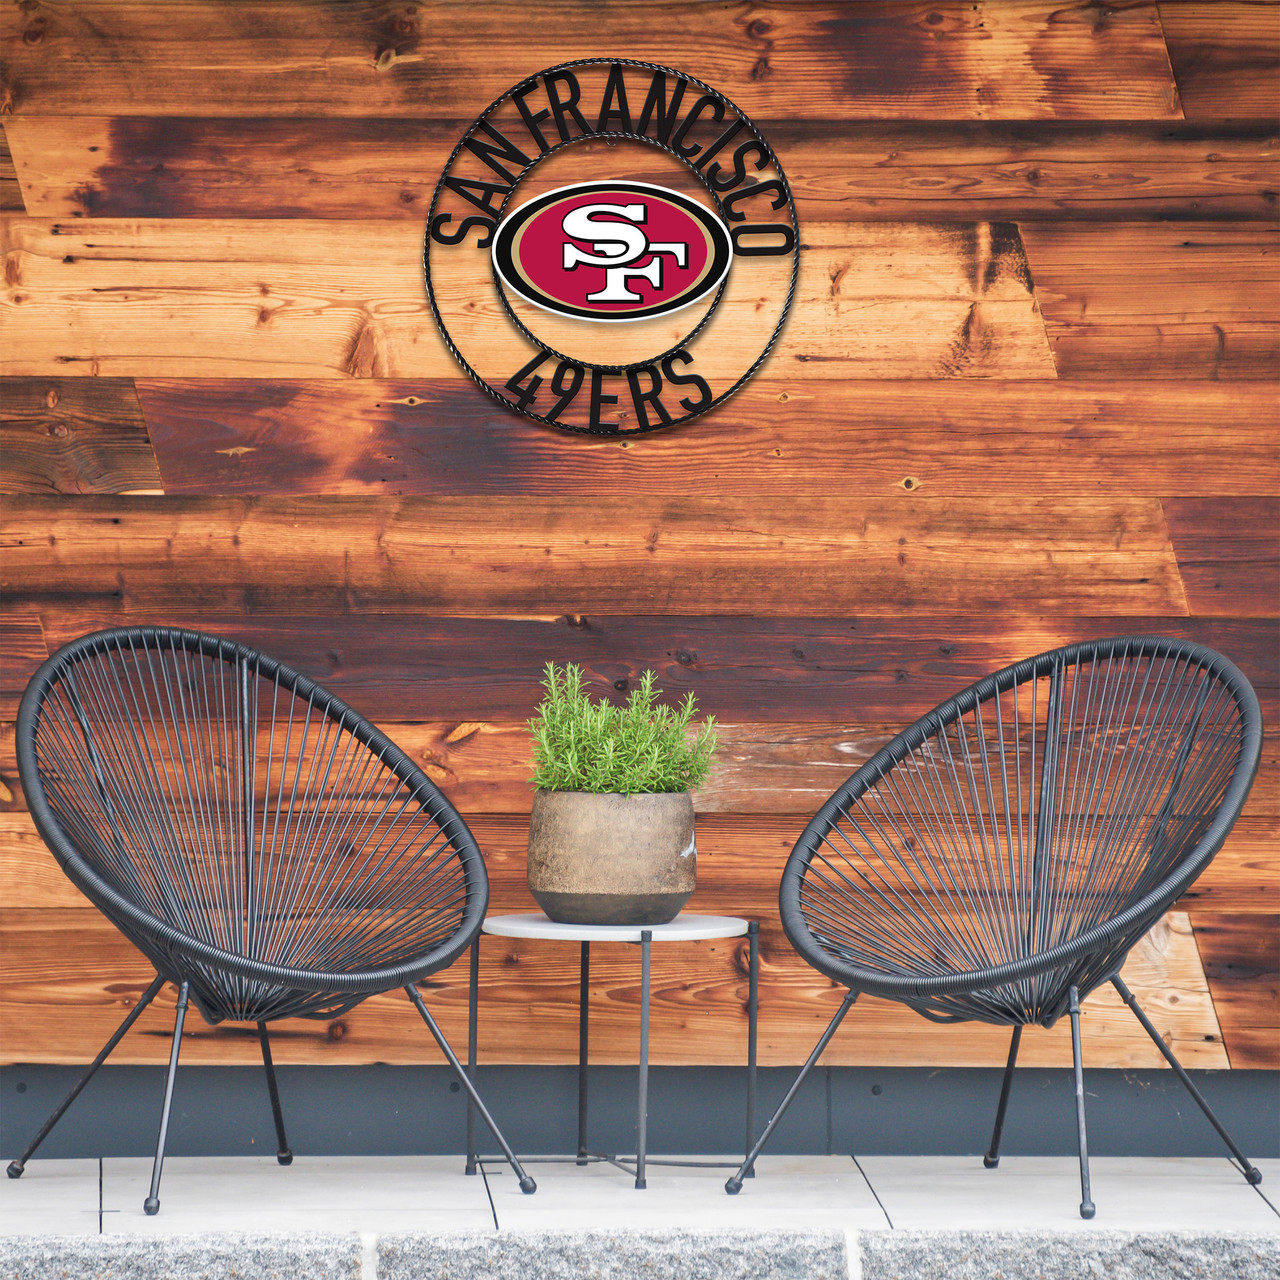 San Francisco 49ers. SF, 24", WI, Wrought Iron, Wall Art, 584-1005, Imperial, NFL, 720801132594